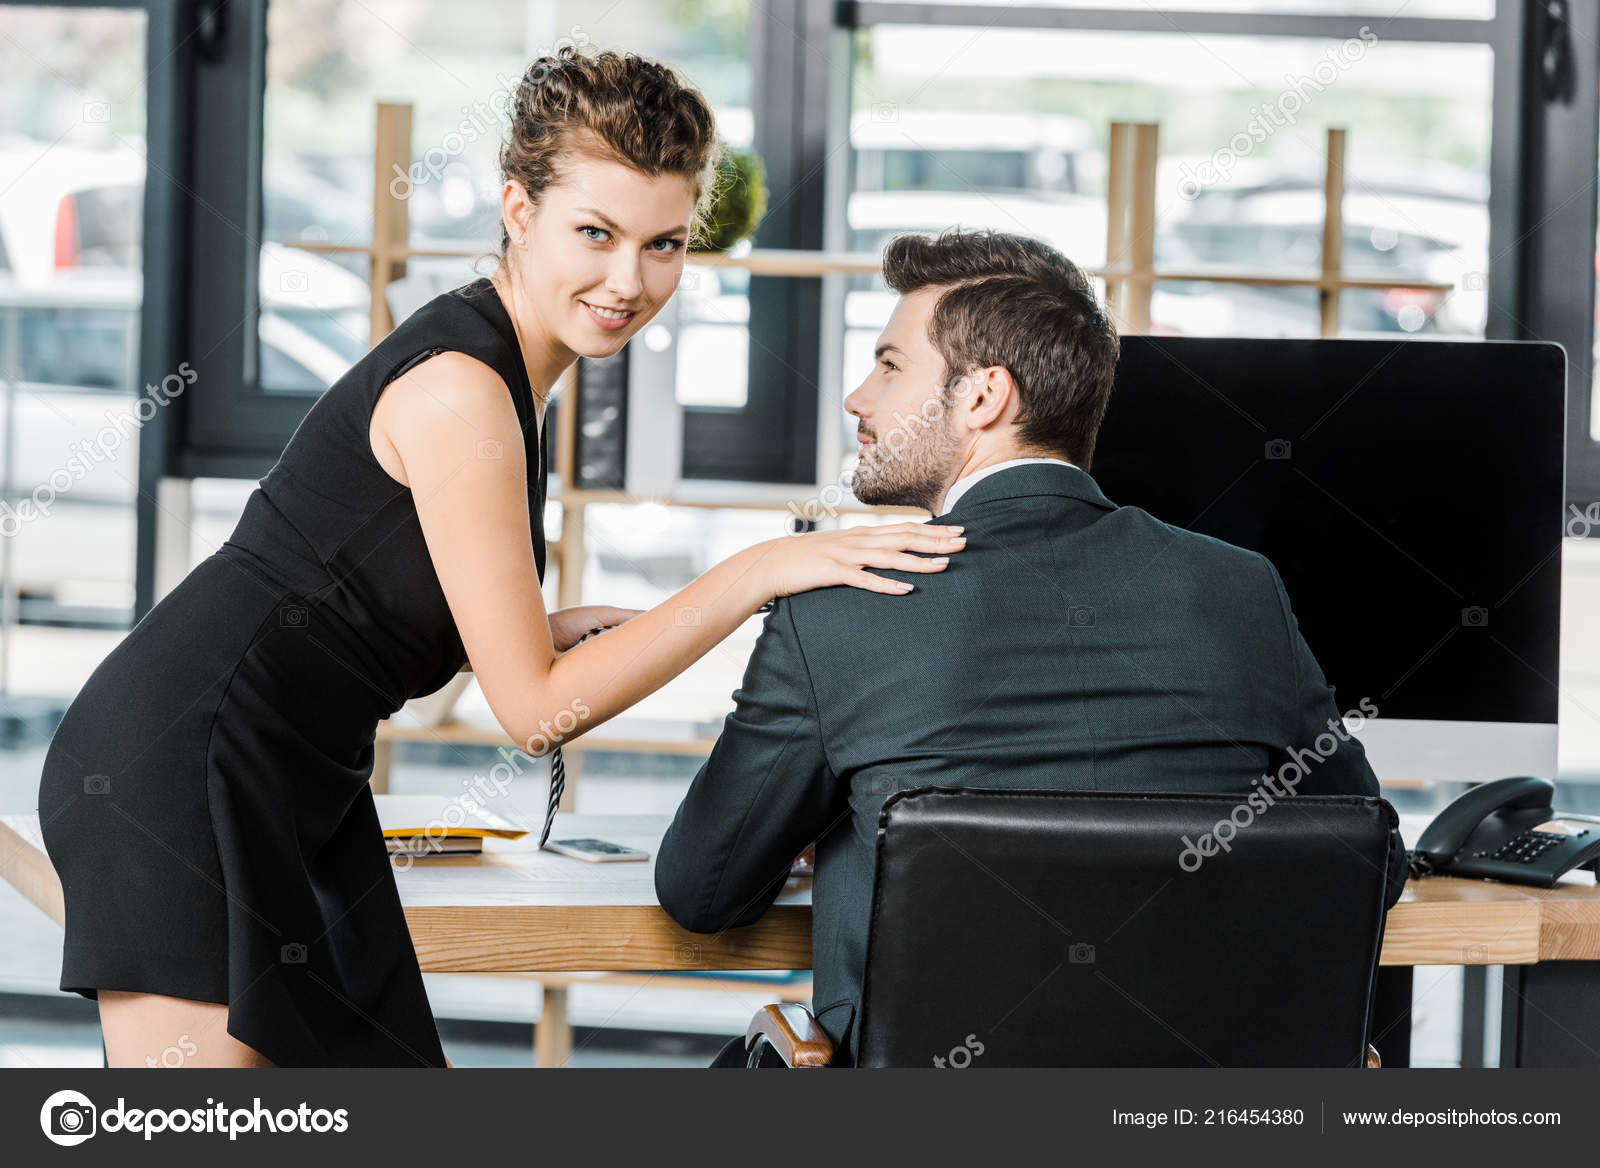 Young Businesswoman Holding Colleagues Tie While Flirting Workplace